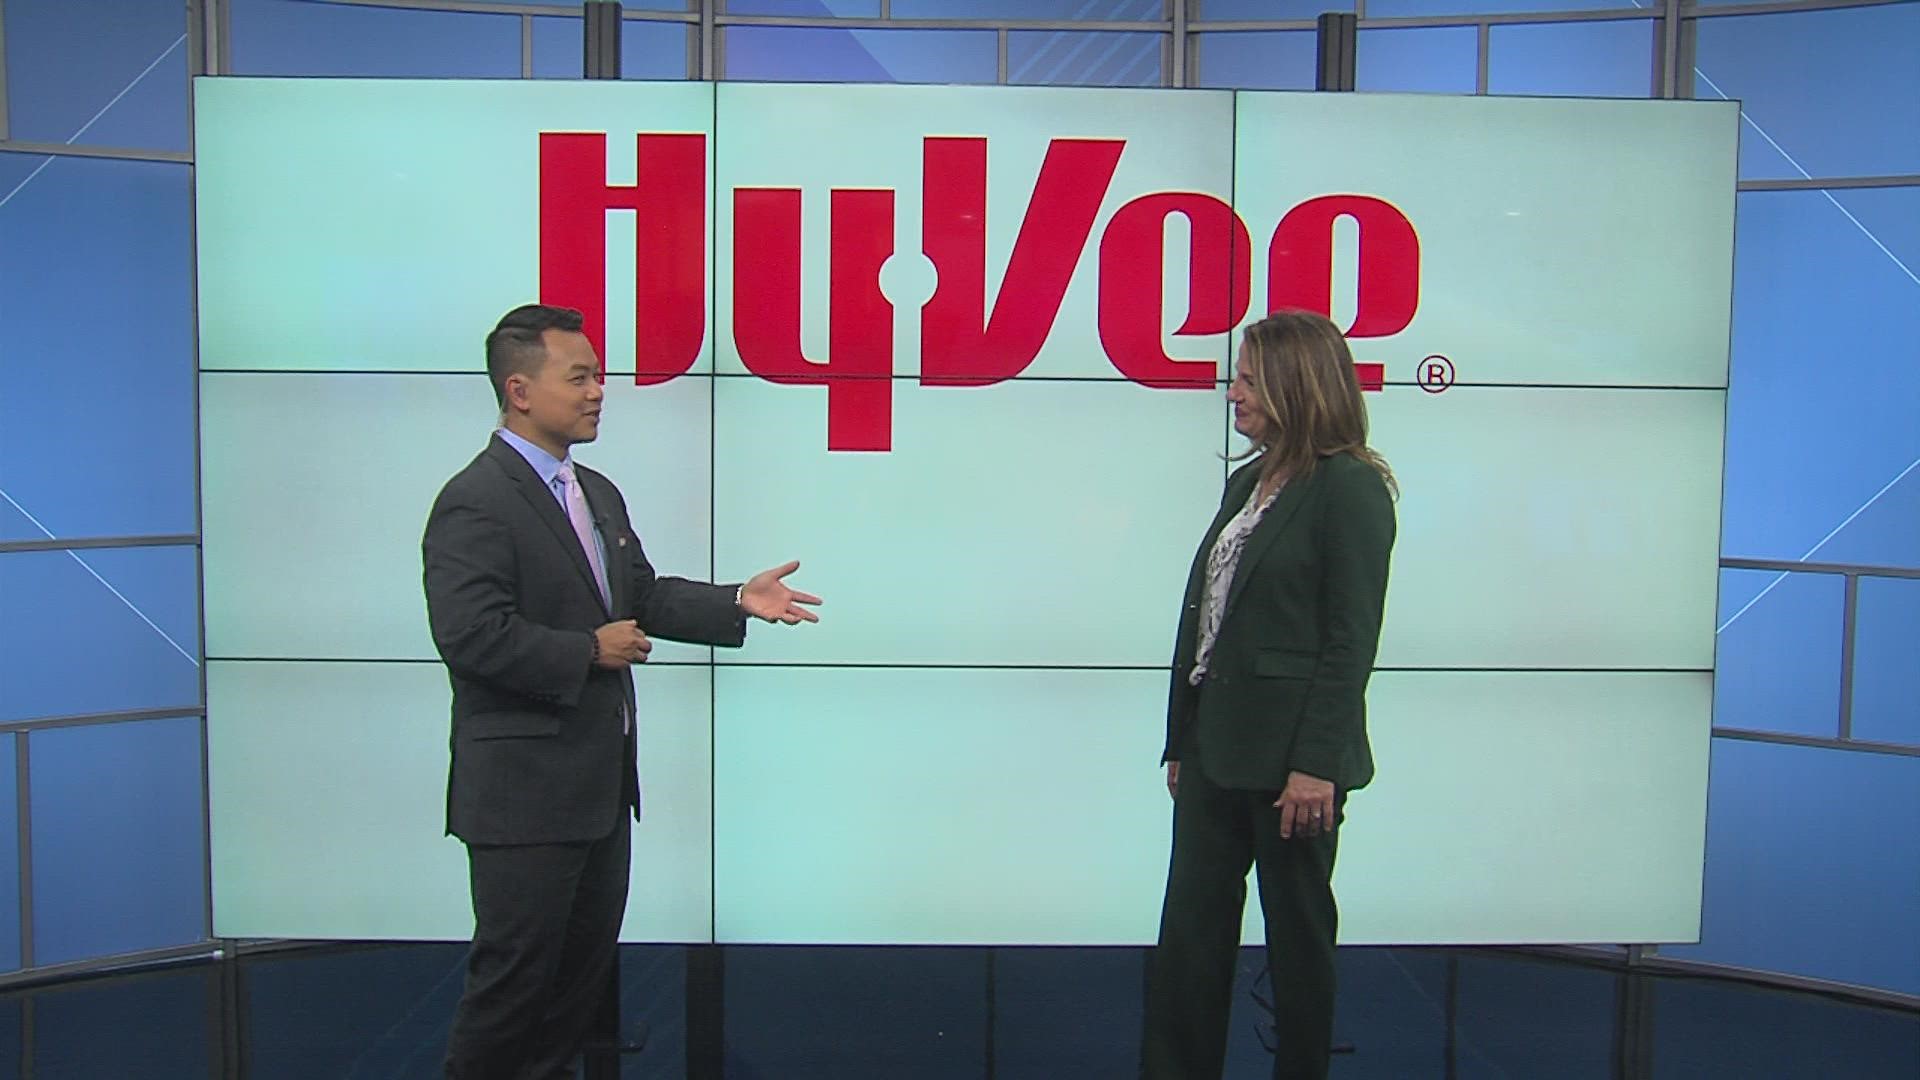 Dawn Buzynski with Hy-Vee shares how to prep for Thanksgiving so that you can stay relaxed and festive this holiday.